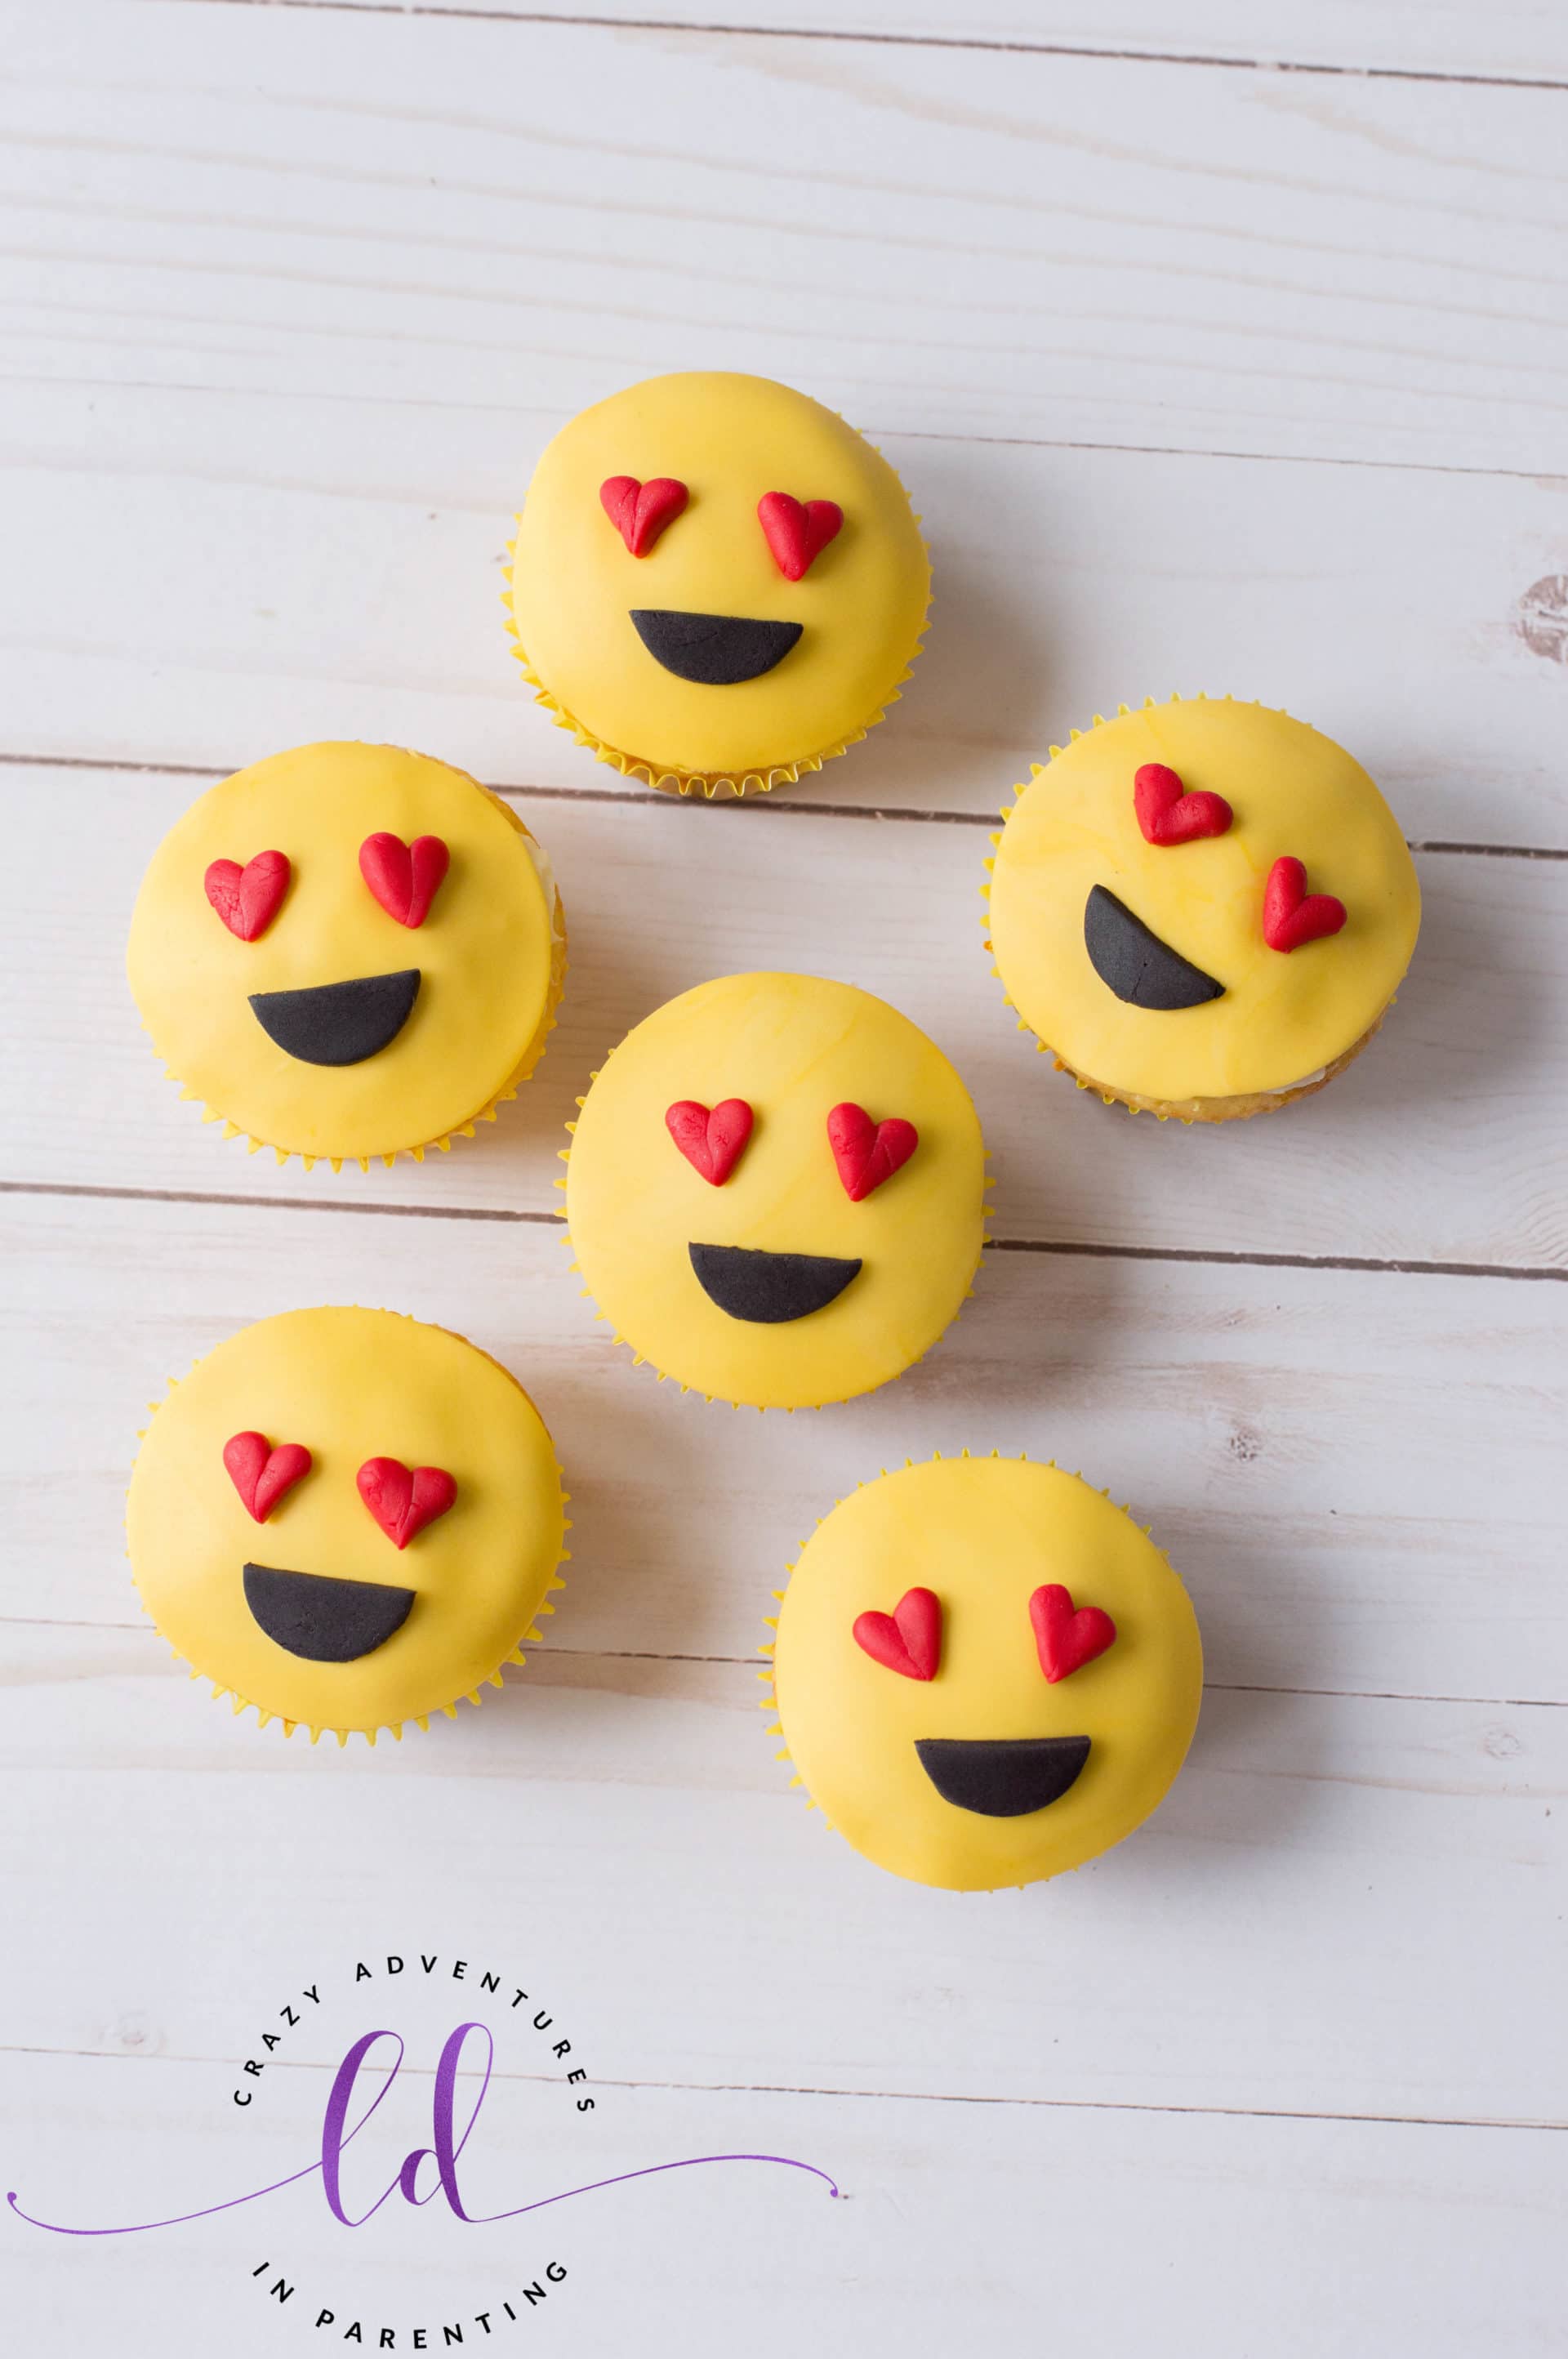 Wink Heart Eye Smiley Face Officially Licensed Cupcake Picks Toppers Set of 6